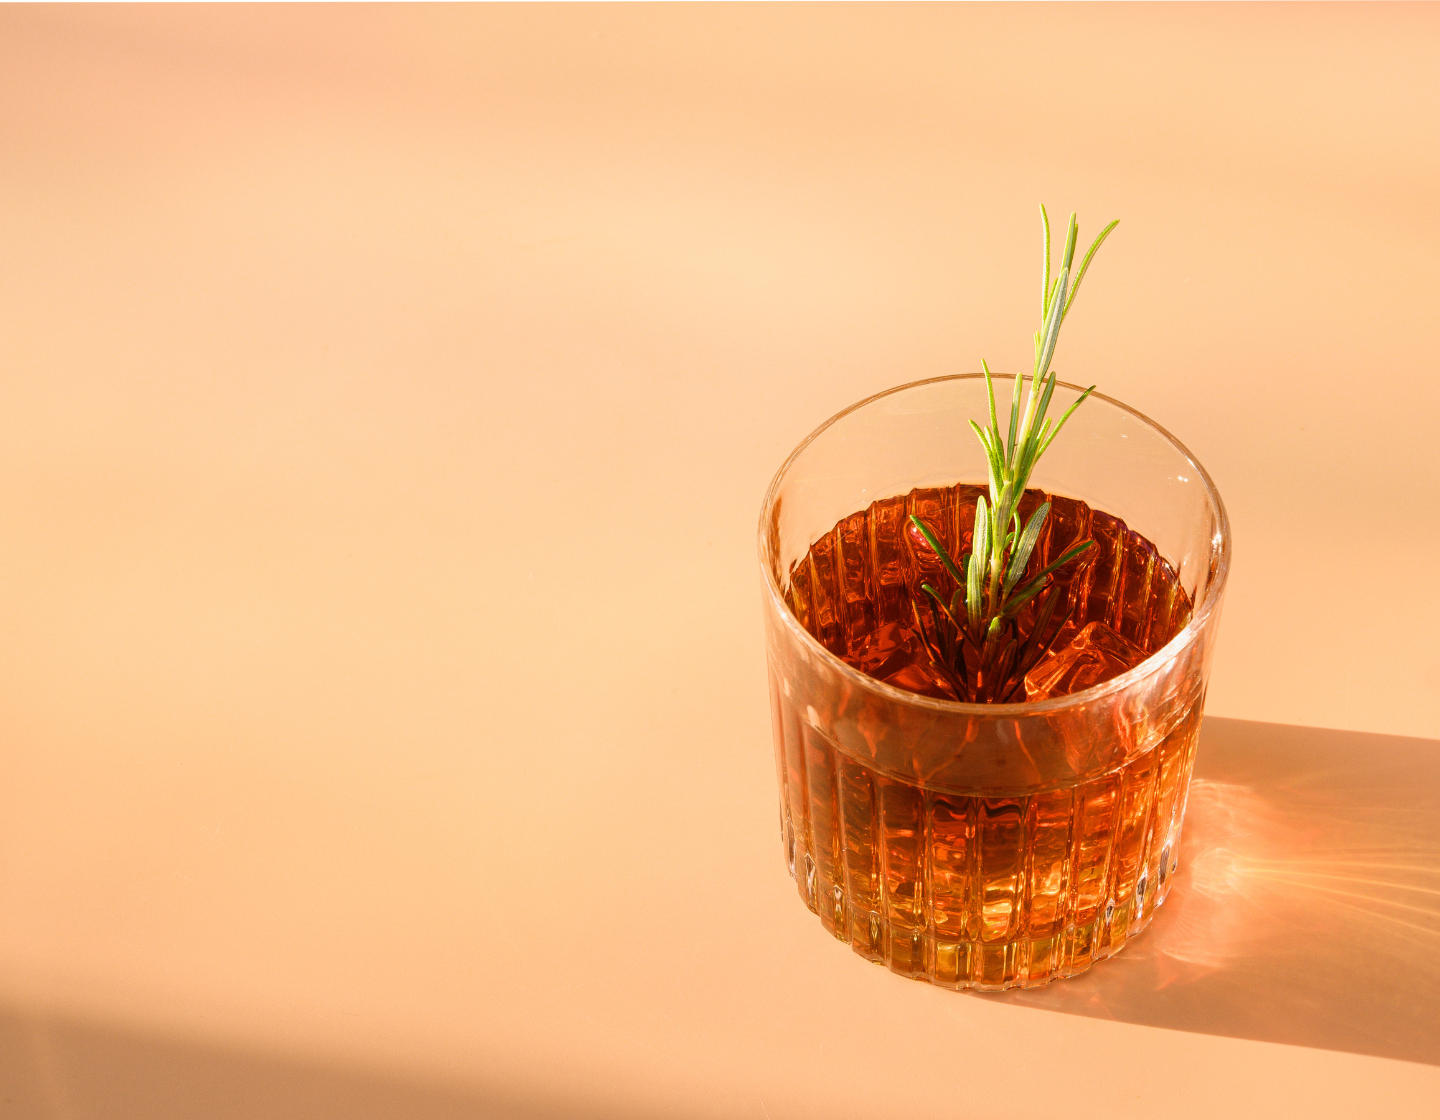   Glass of Whisky with ice and rosemary garnish 